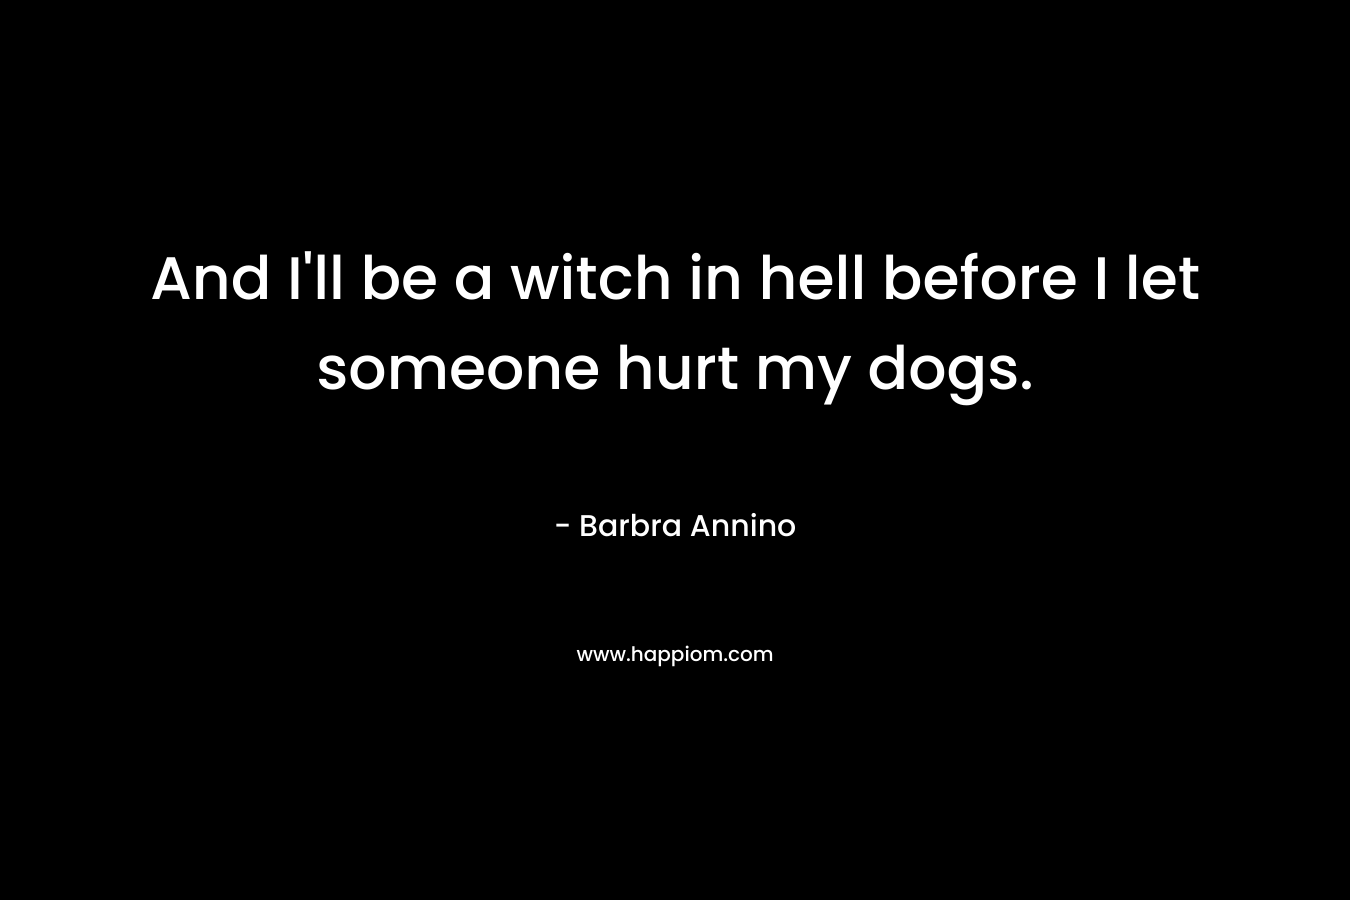 And I’ll be a witch in hell before I let someone hurt my dogs. – Barbra Annino